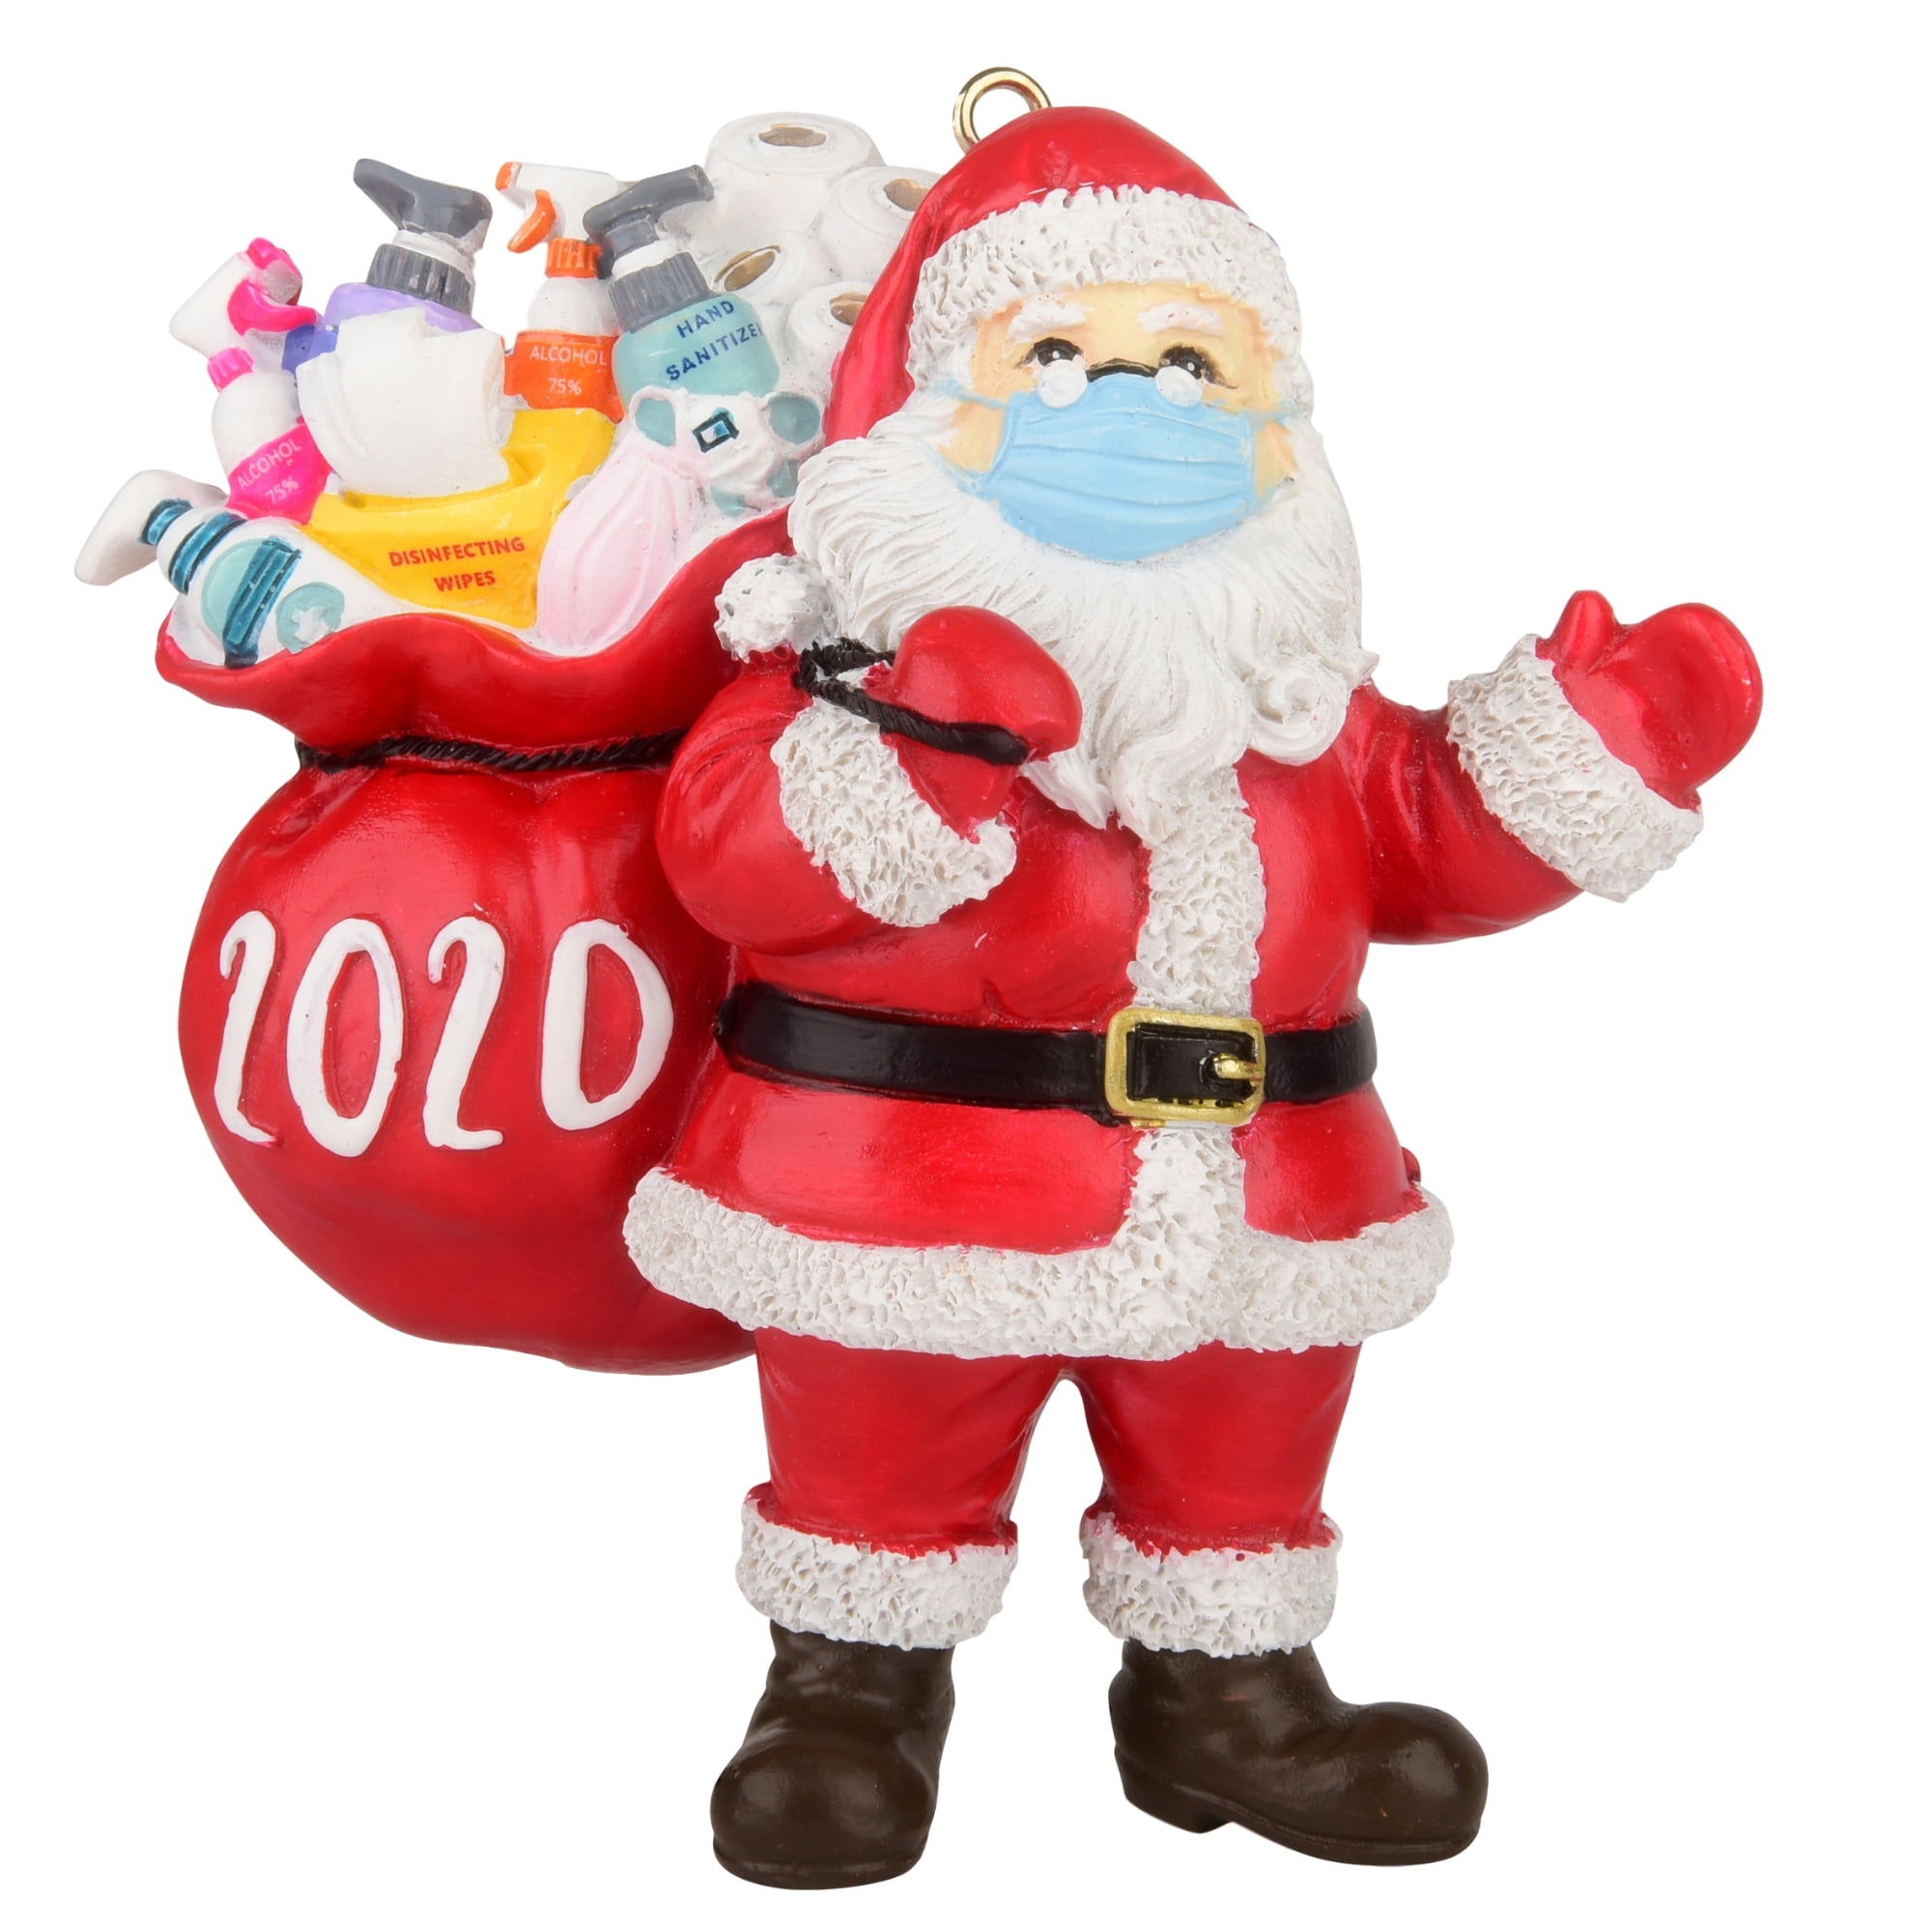 Details about   Christmas Tree Ornaments 2020 Santa Wearing Mask Hanging Decor LOCKDOWN Gift USA 